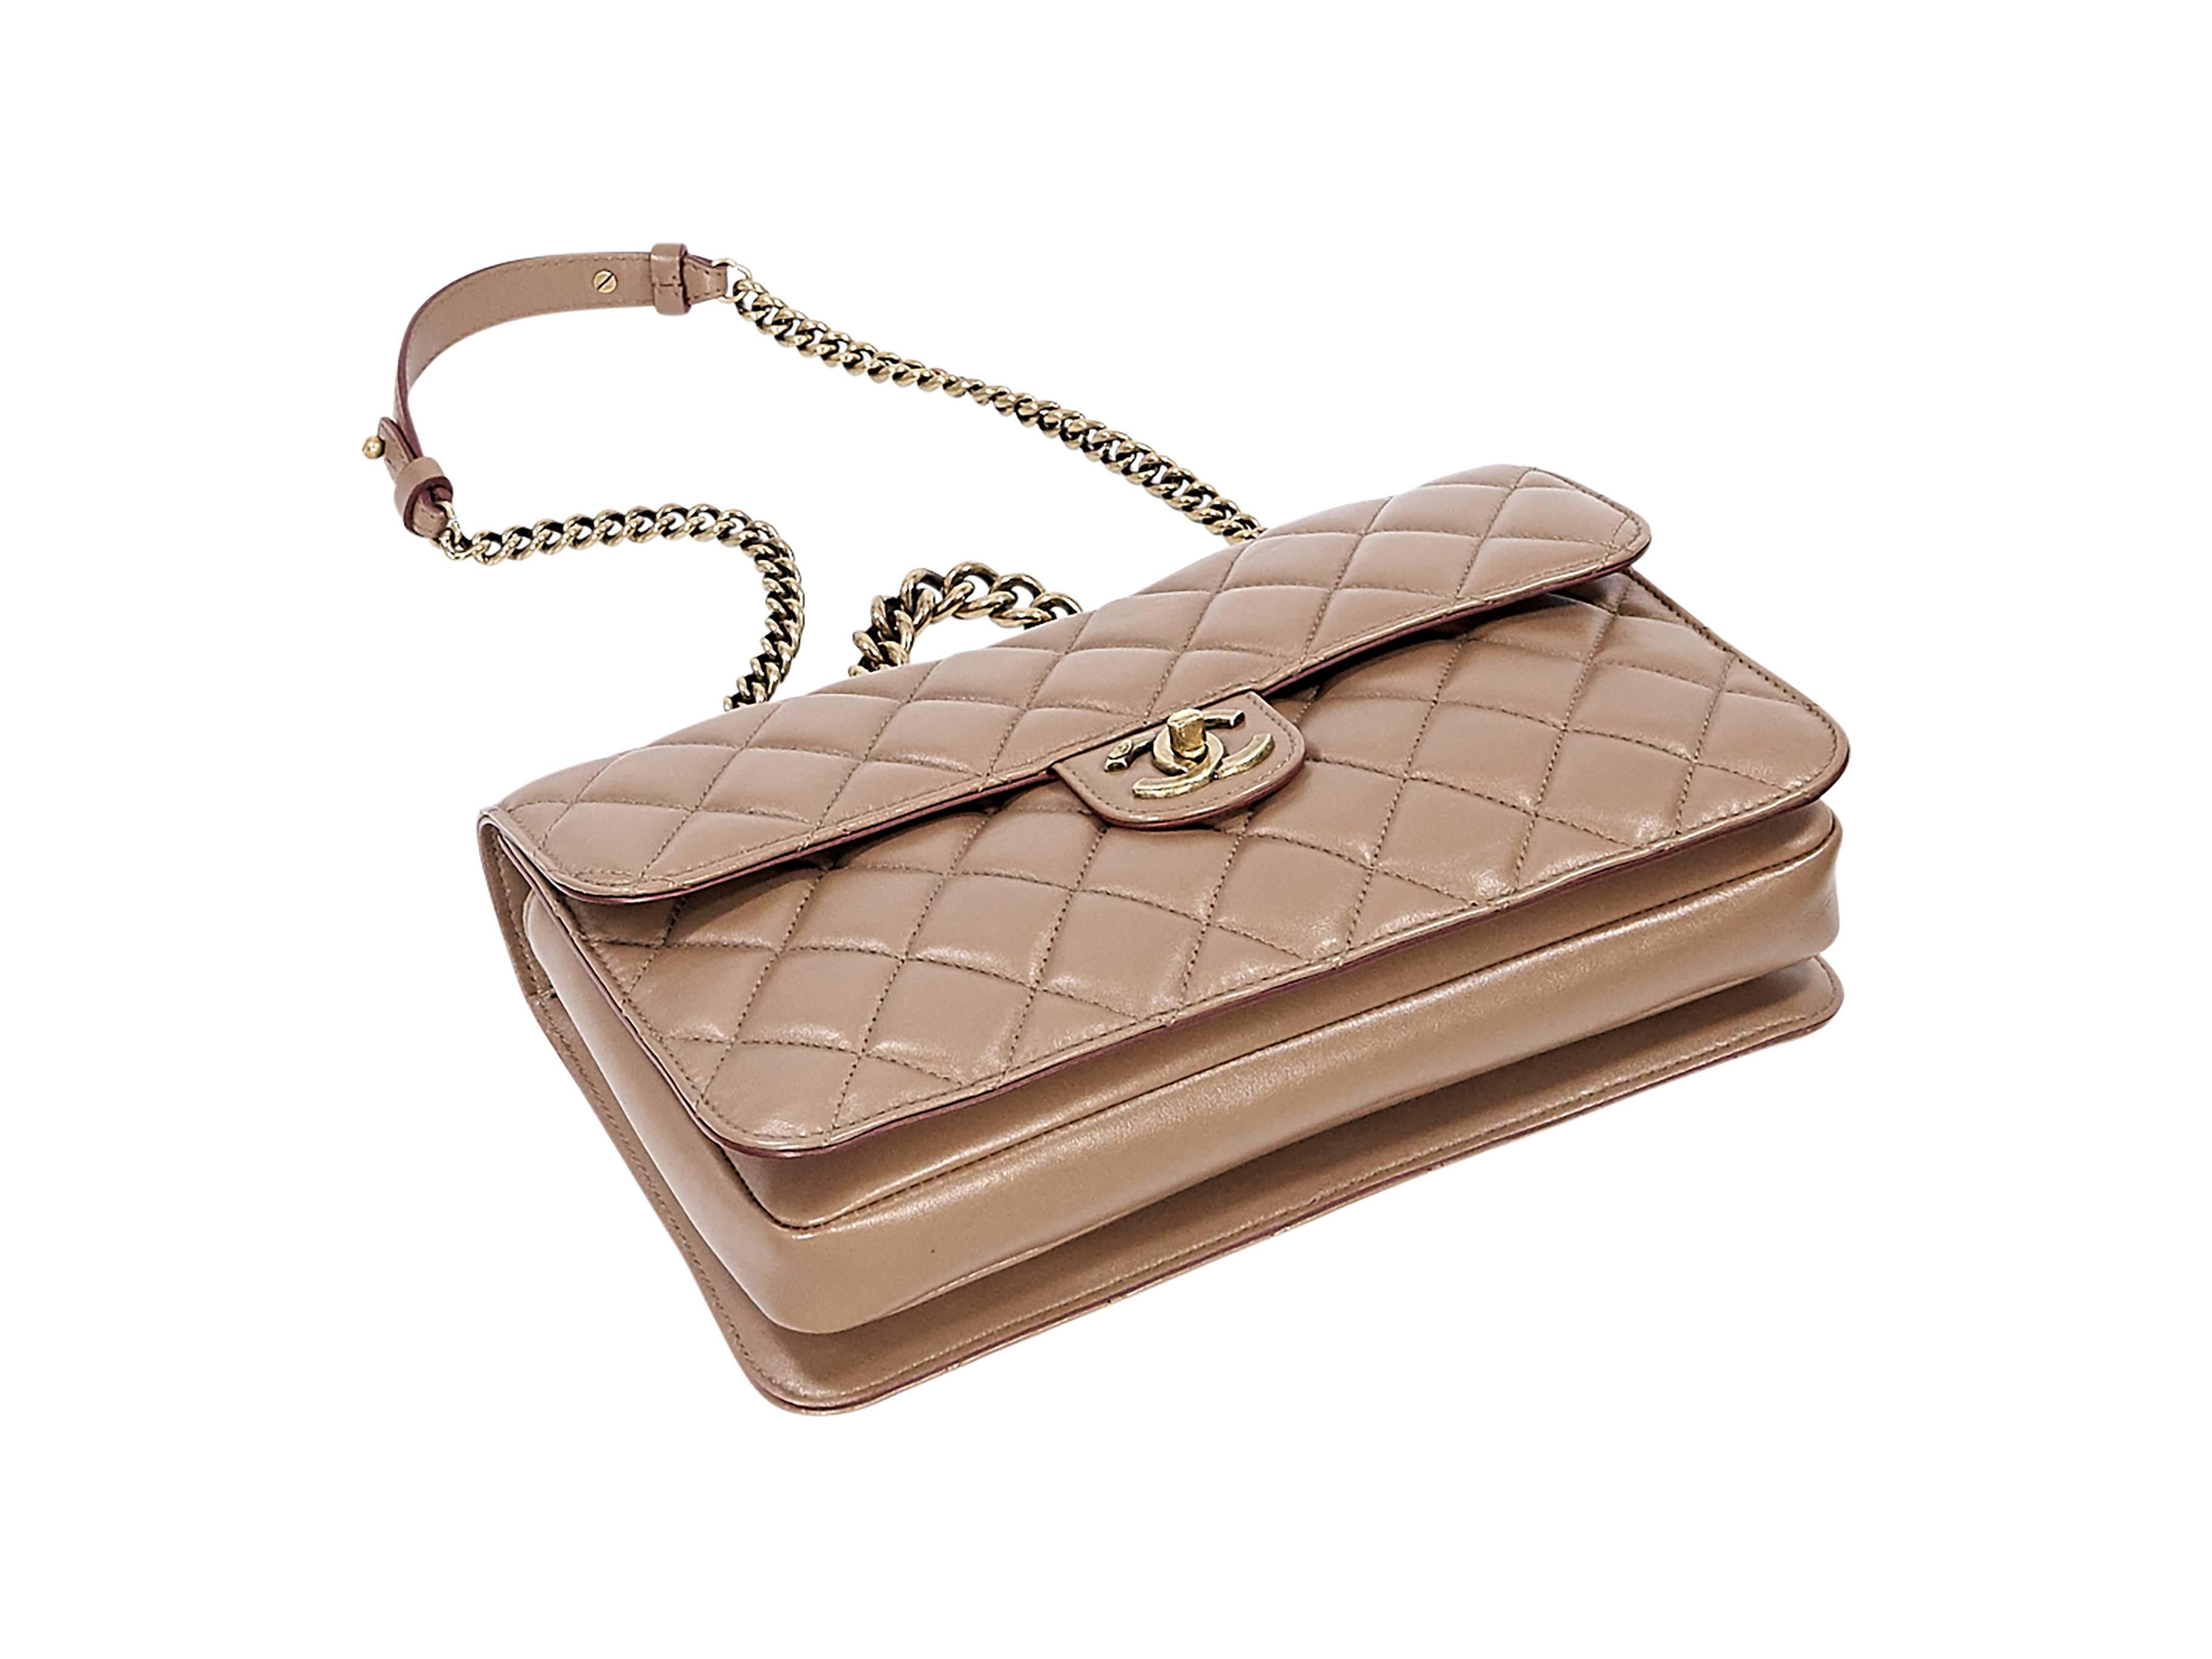 Product details:  Tan quilted leather flap bag by Chanel.  Top chain handle.  Chain and leather shoulder strap.  Twist-lock CC closure on front flap.  Two compartments under both flaps.  Lined interiors with zip pocket.  Goldtone hardware.  12.25